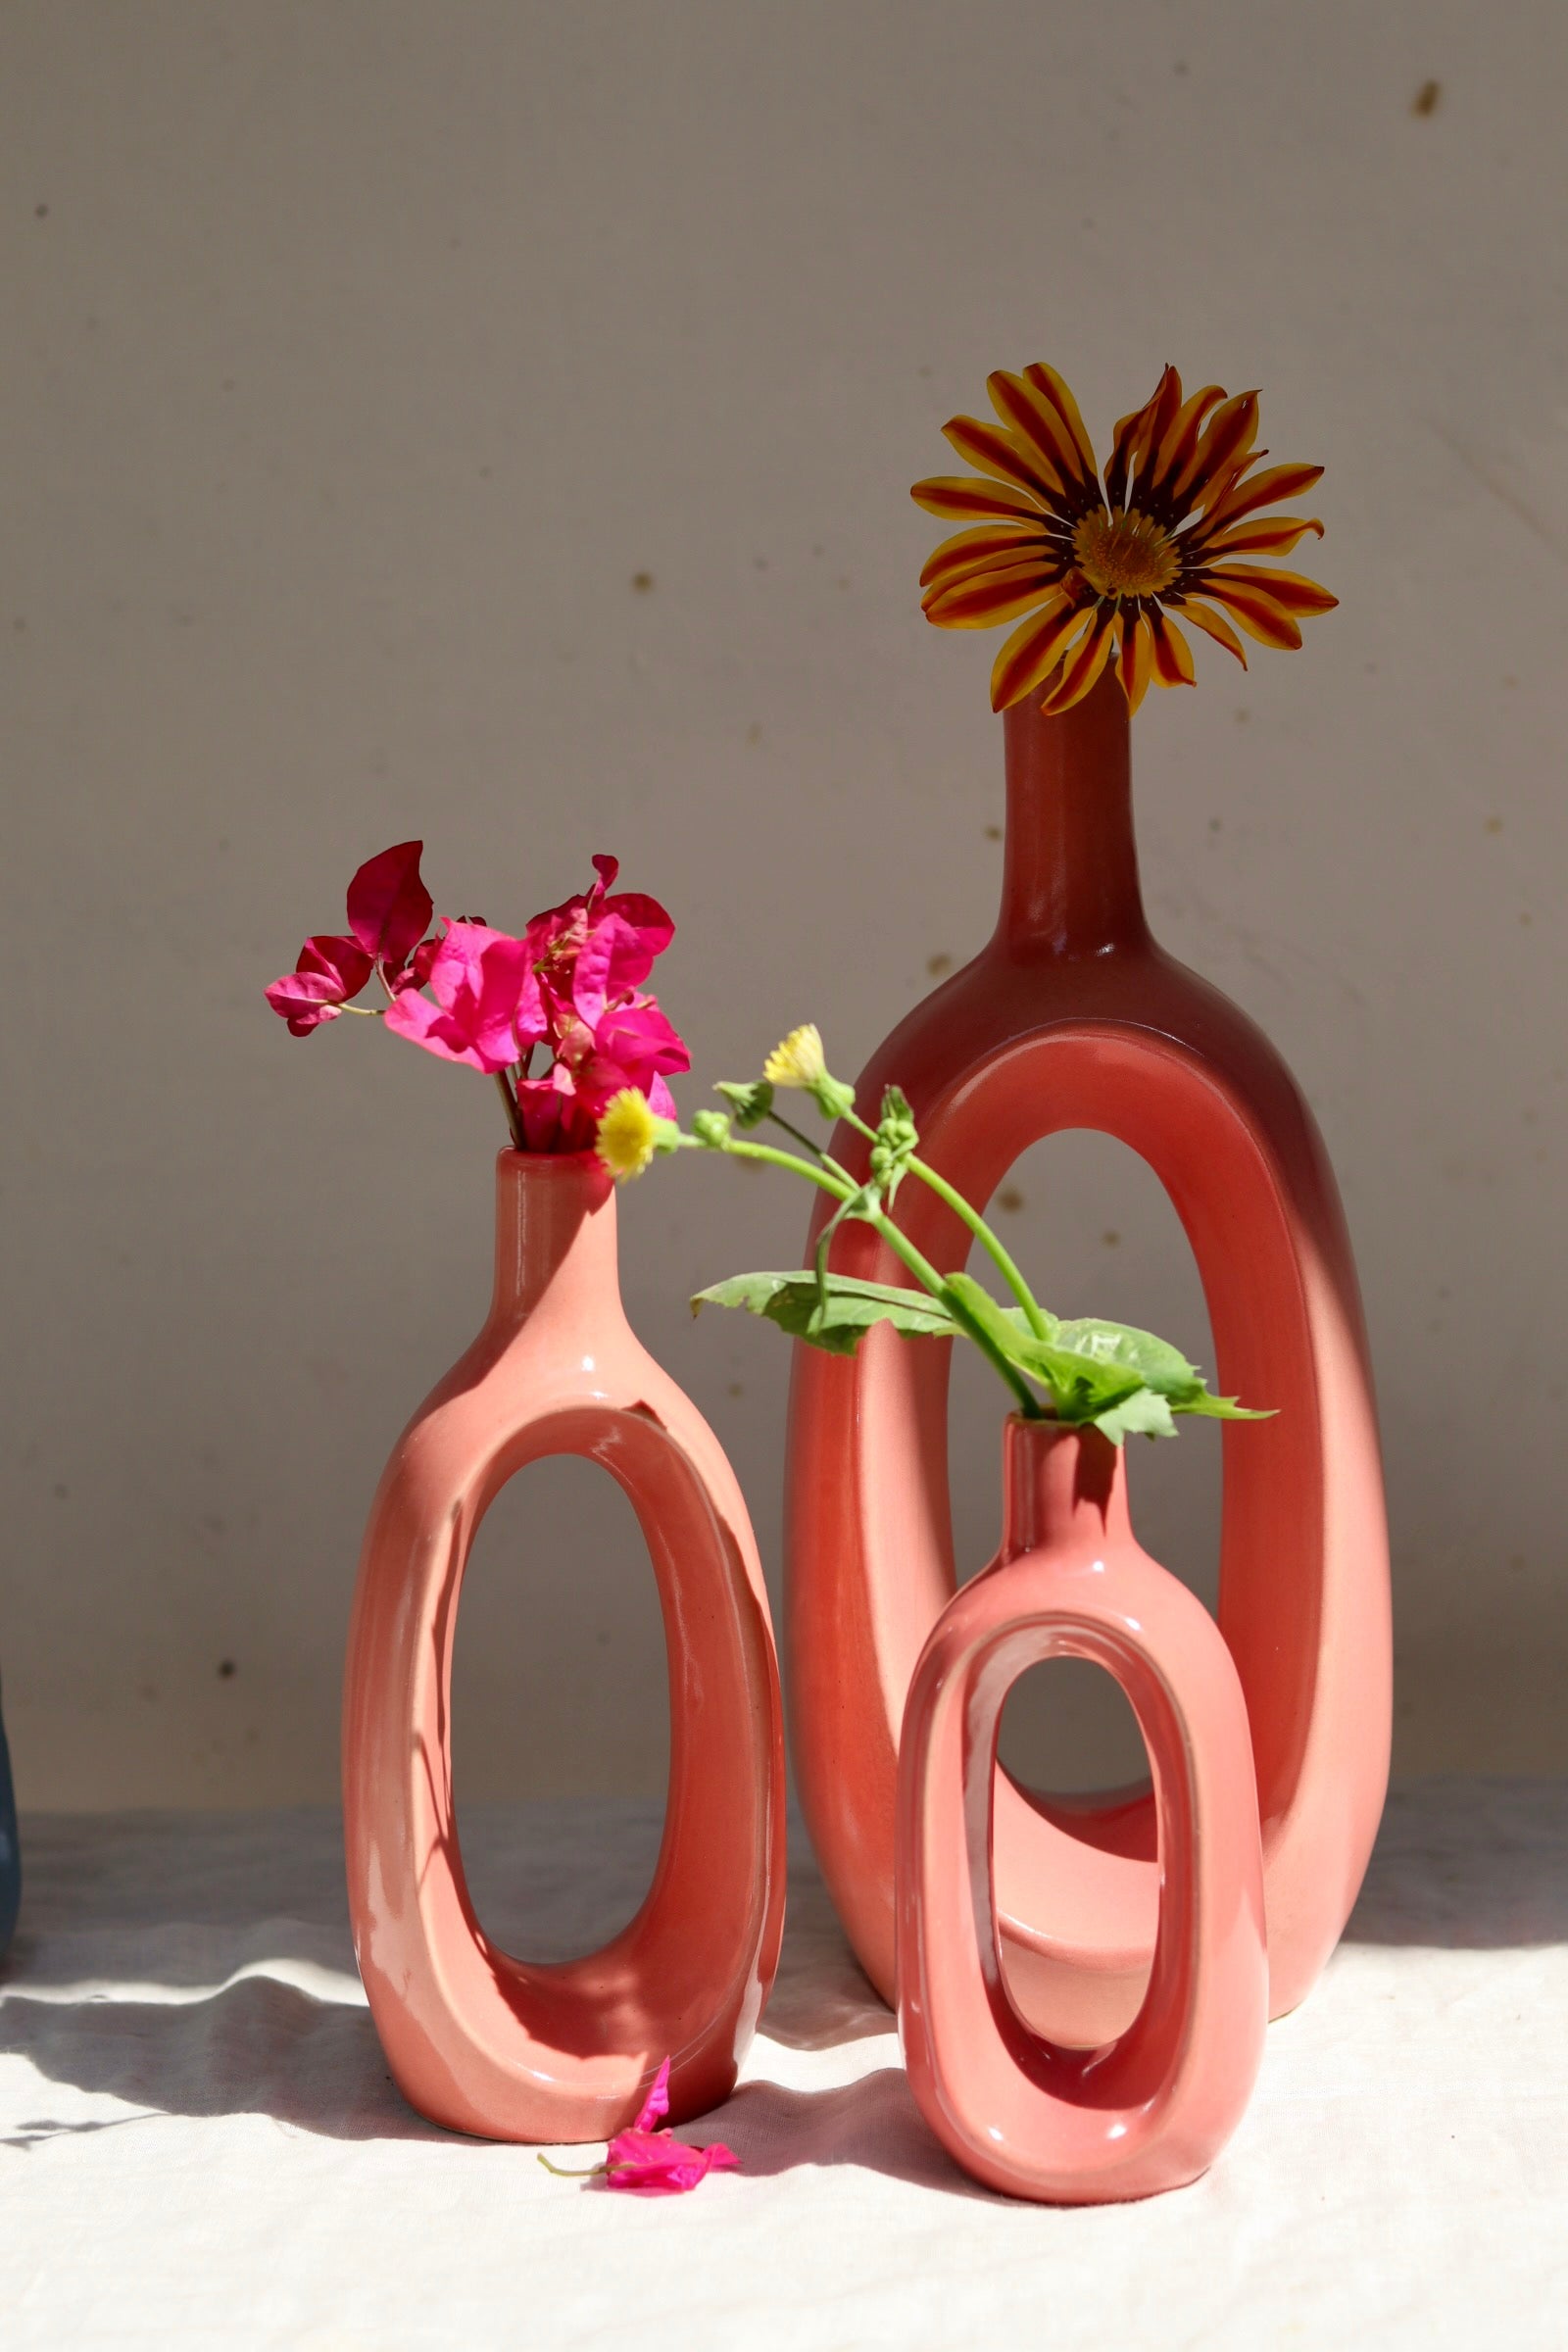 Three pink contour vases with flowers